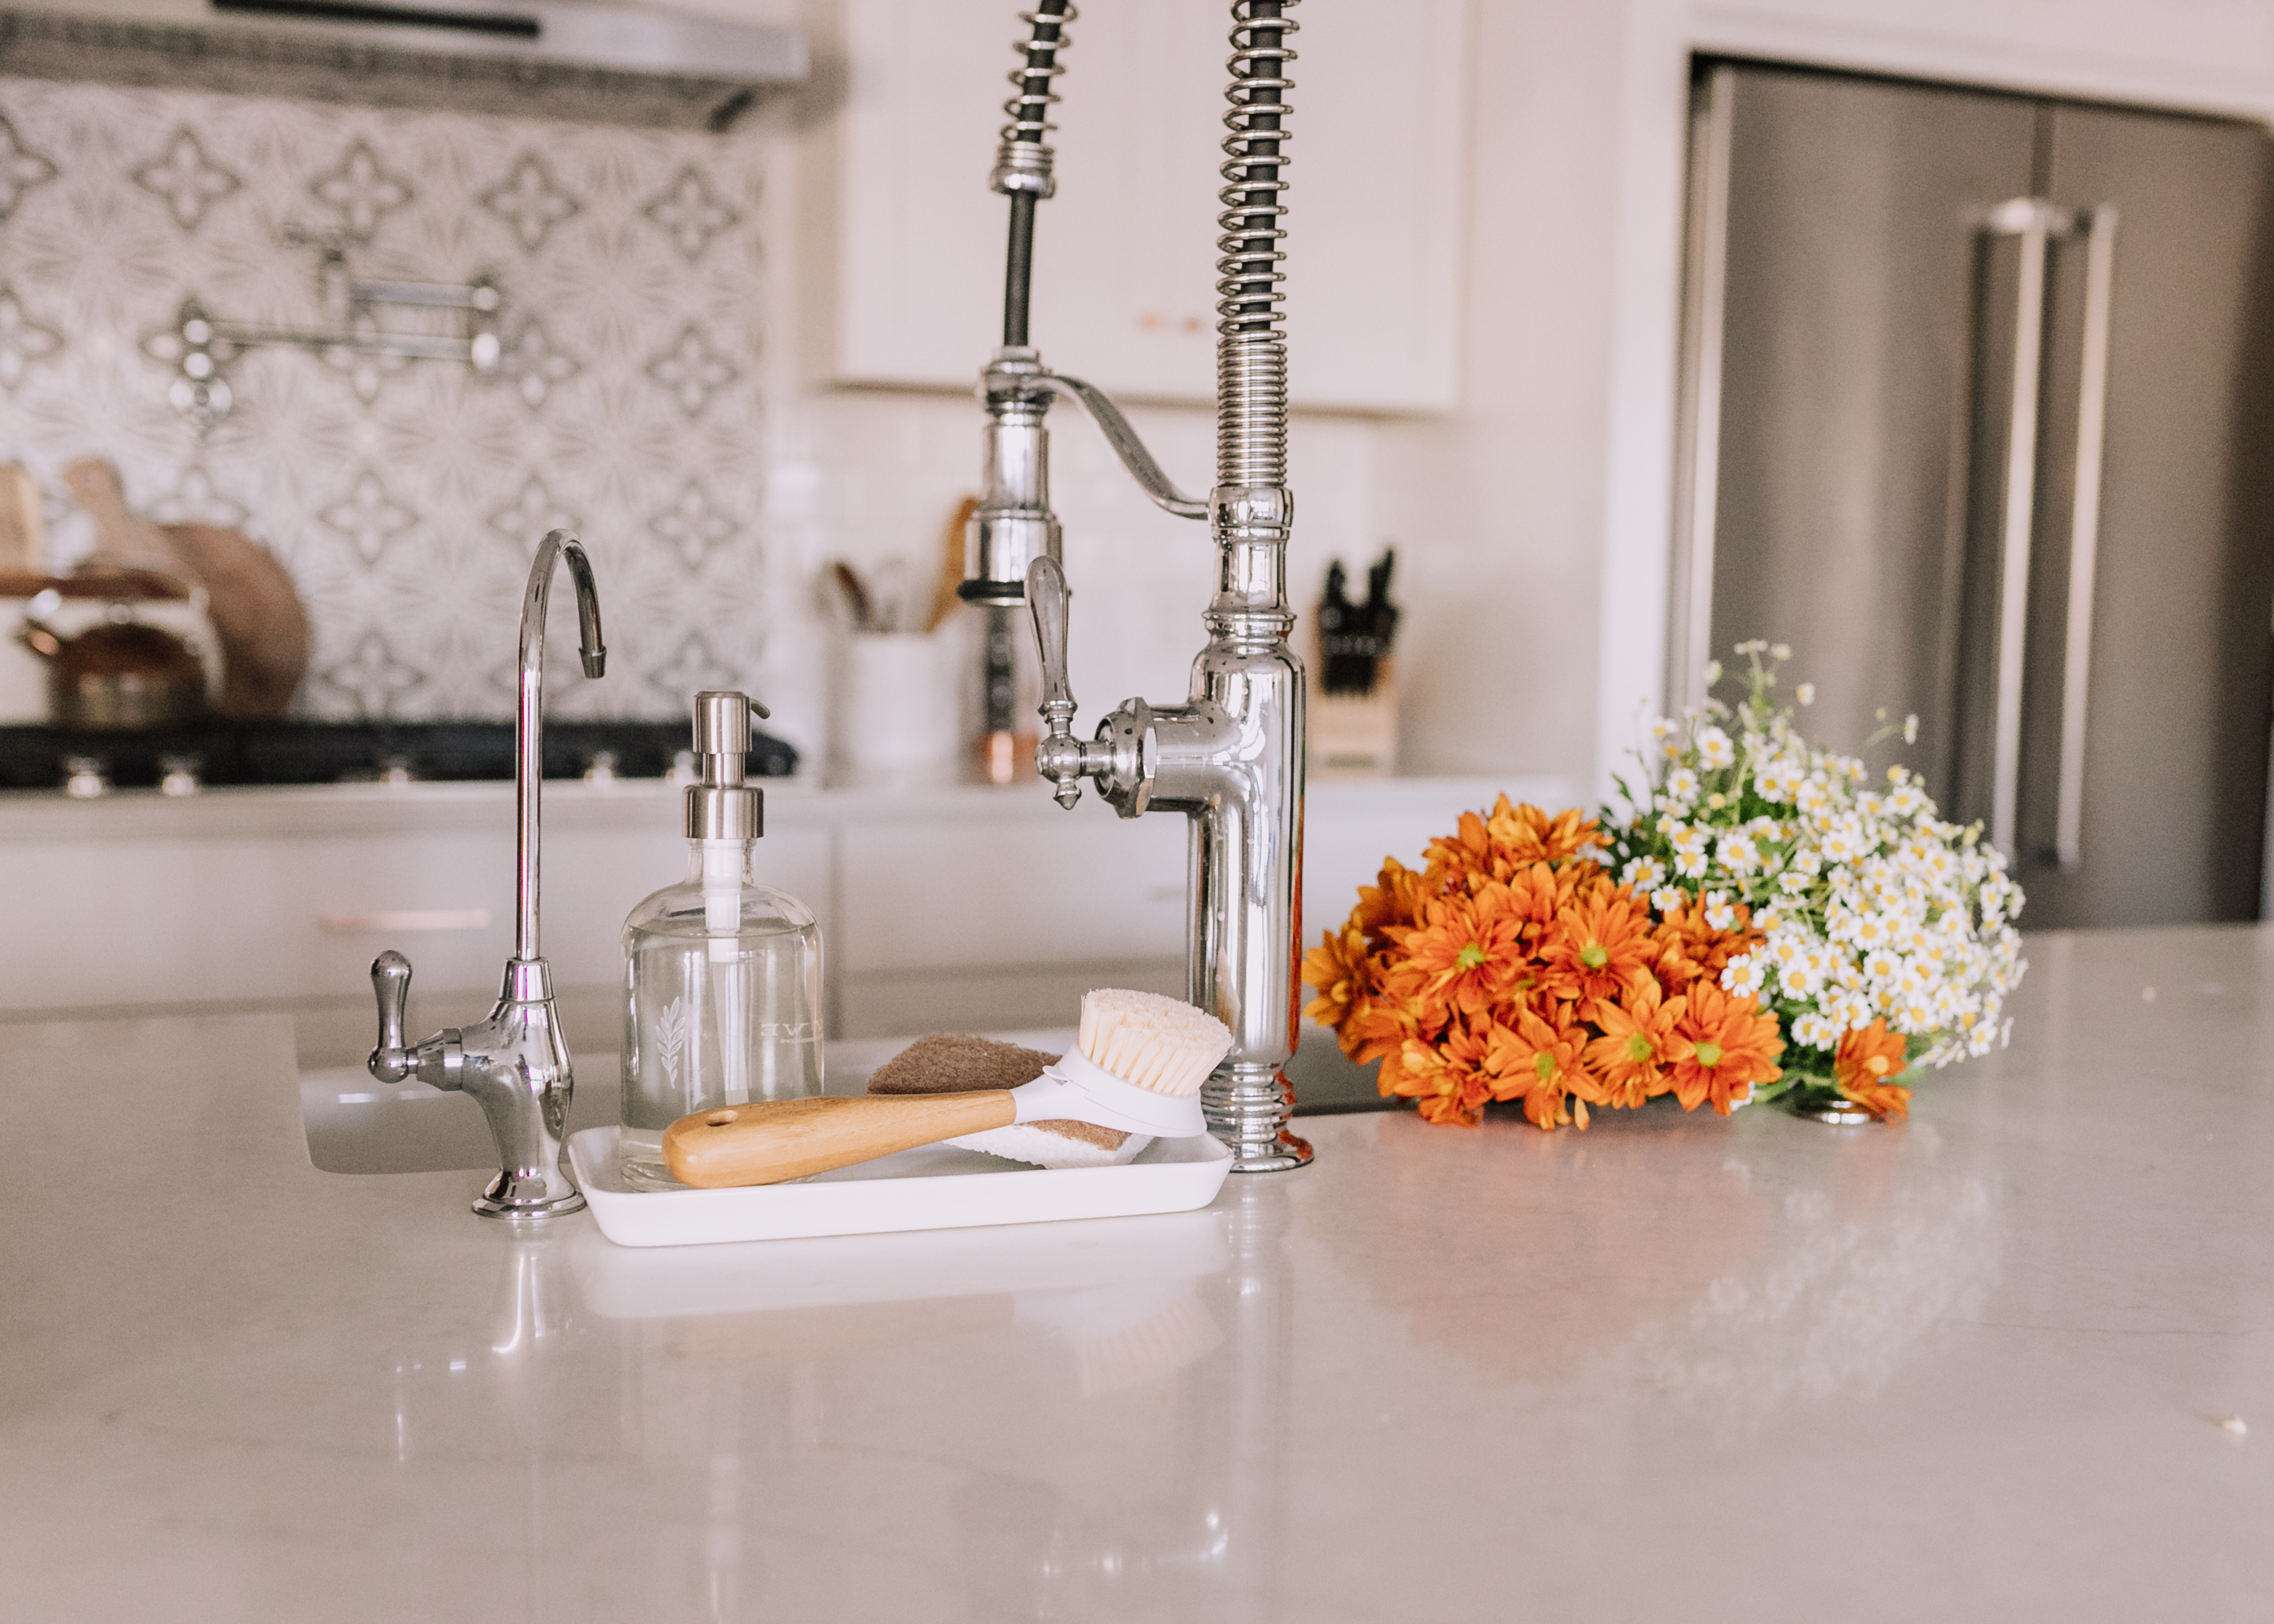 using glass soap dispensers and bamboo dish scrubbers is one way to make sustainable switches in your home! #thelovedesigneldife #sustainablehome #kitchen